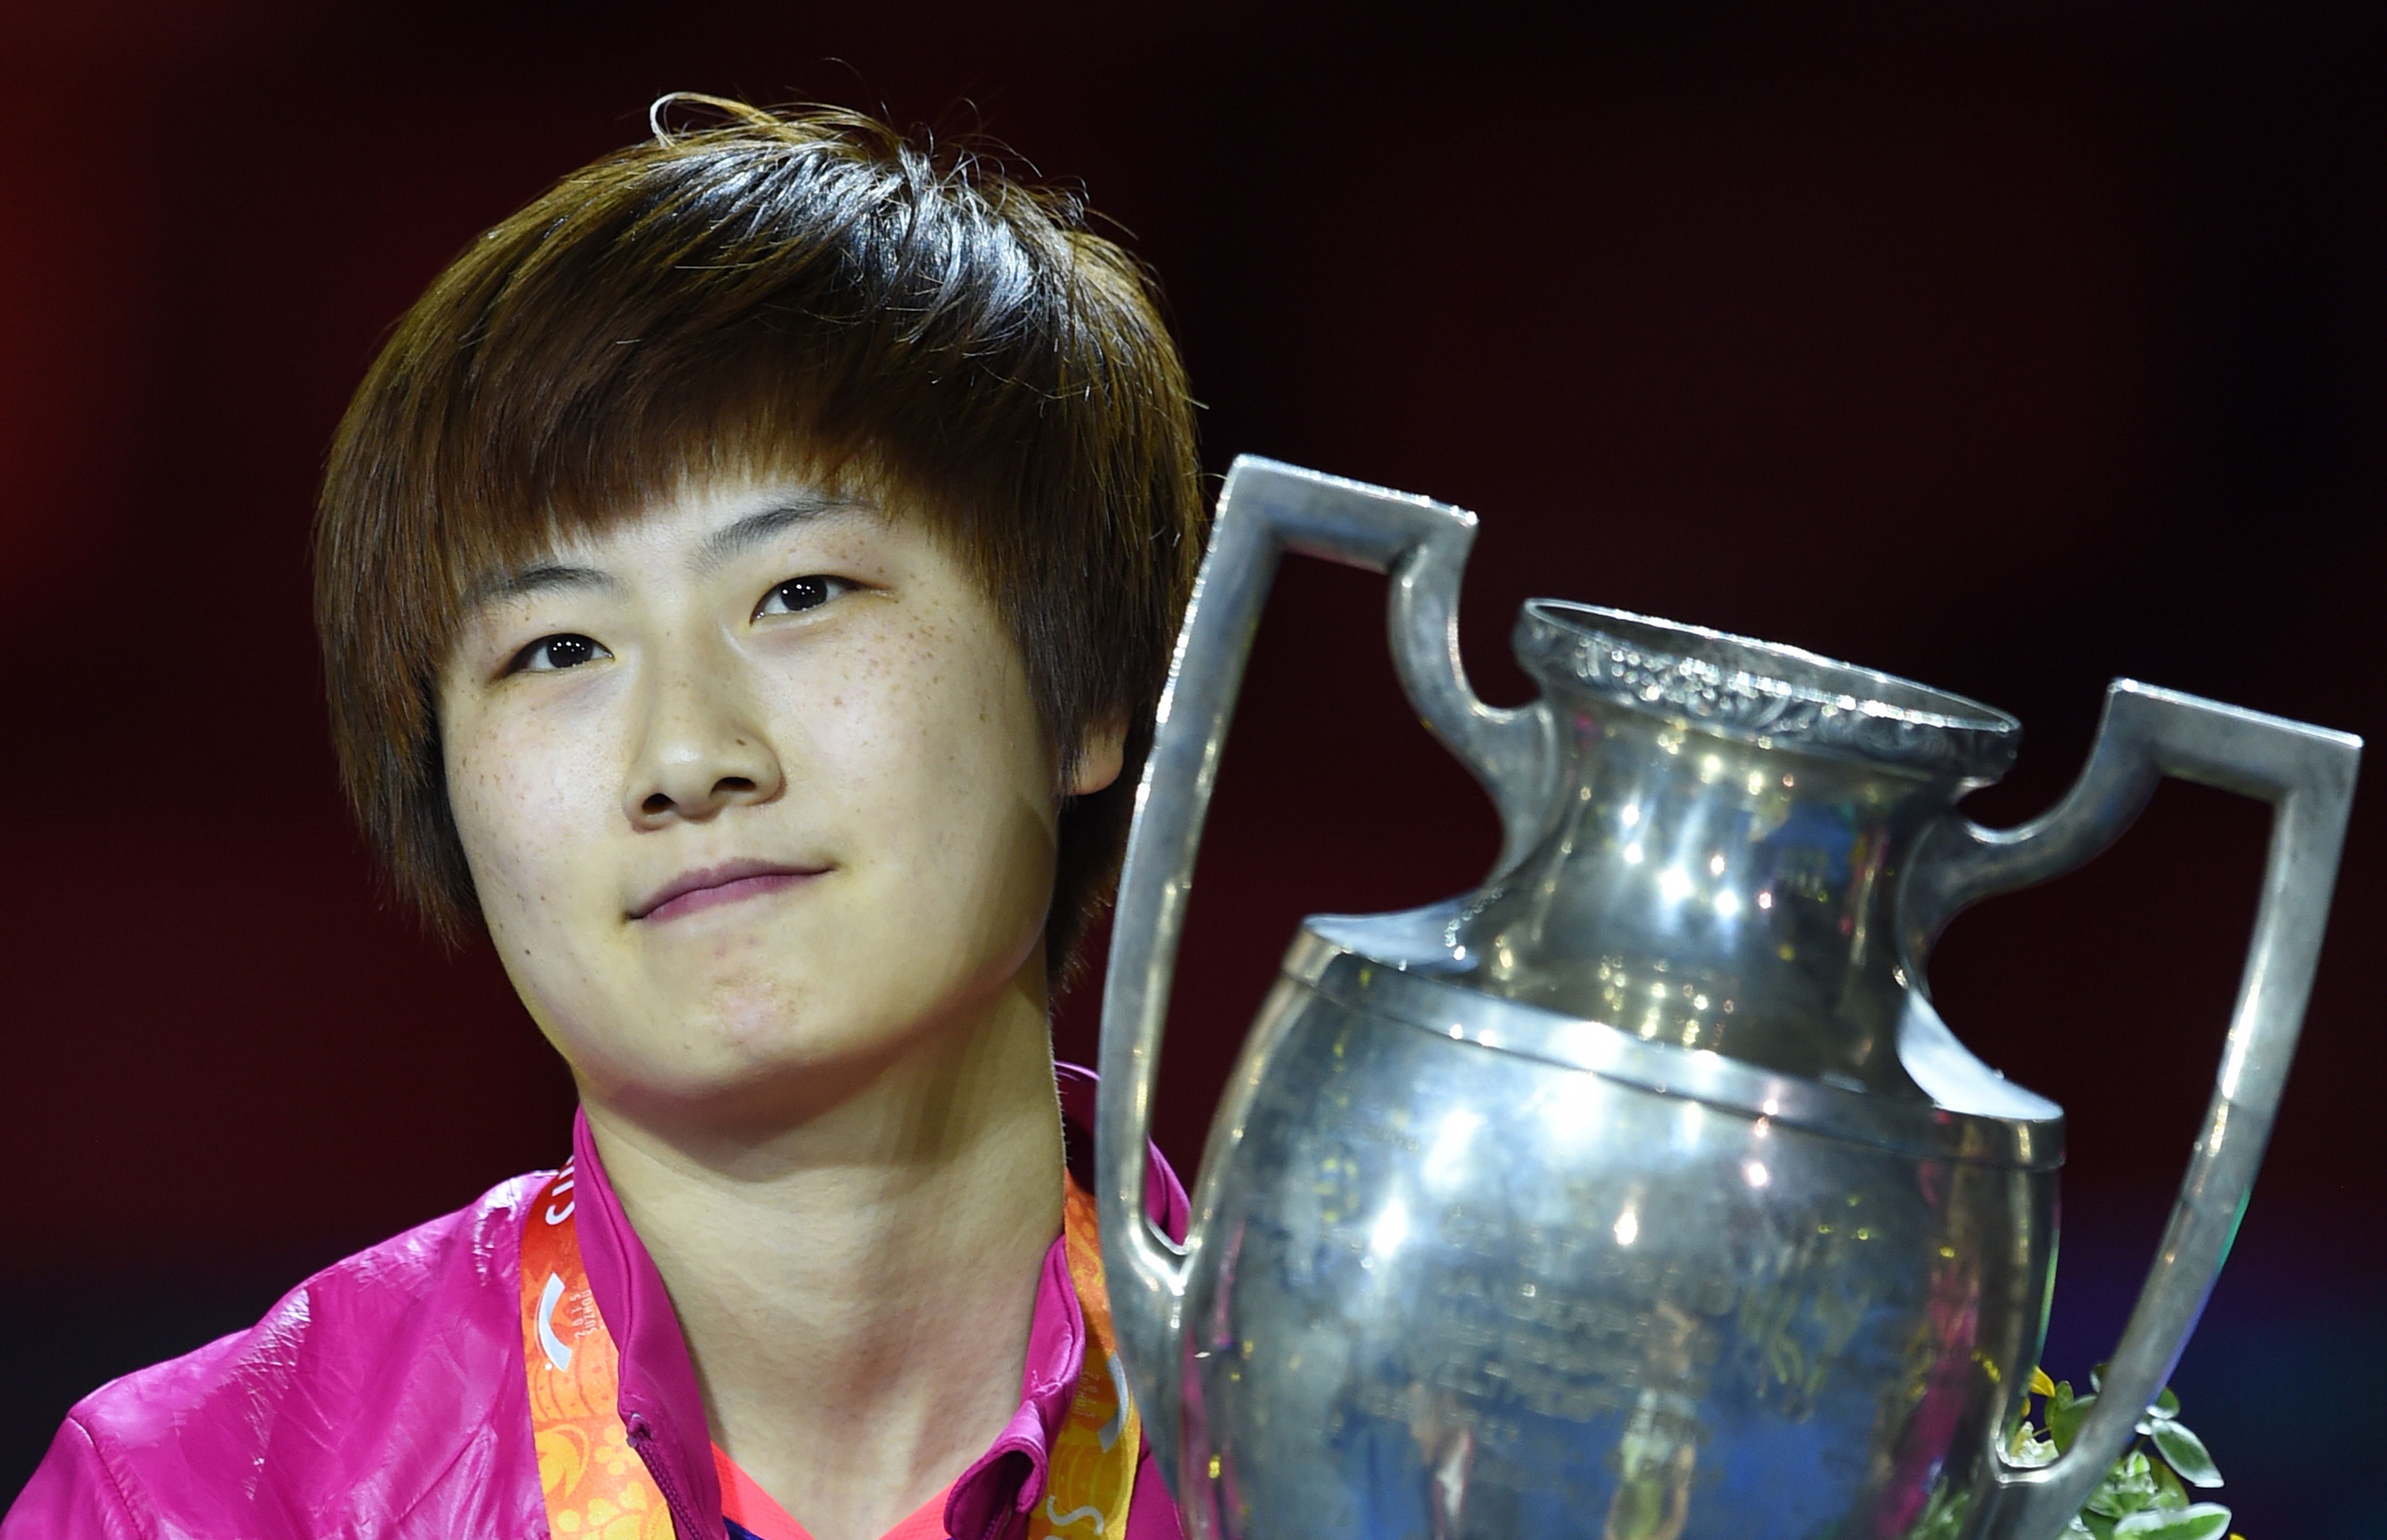 Ding Ning of China poses with her trophy after winning the women's singles final against teammate Liu Shiwen at the World Table Tennis Championships in Suzhou. Photo: AFP